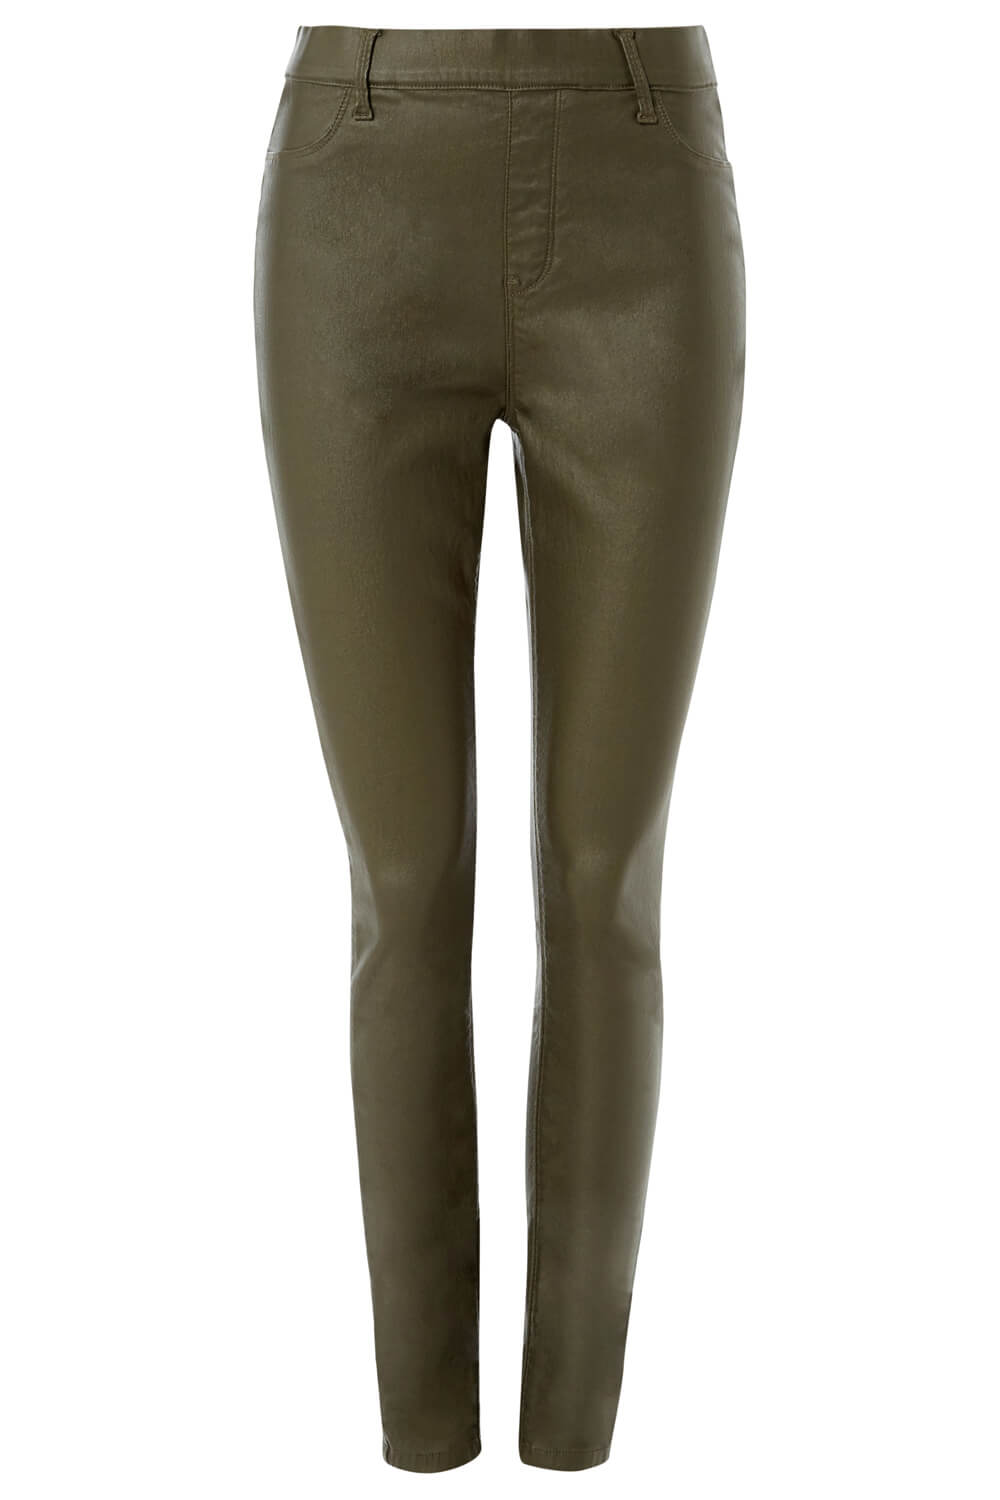 KHAKI Faux Leather Trousers, Image 5 of 5